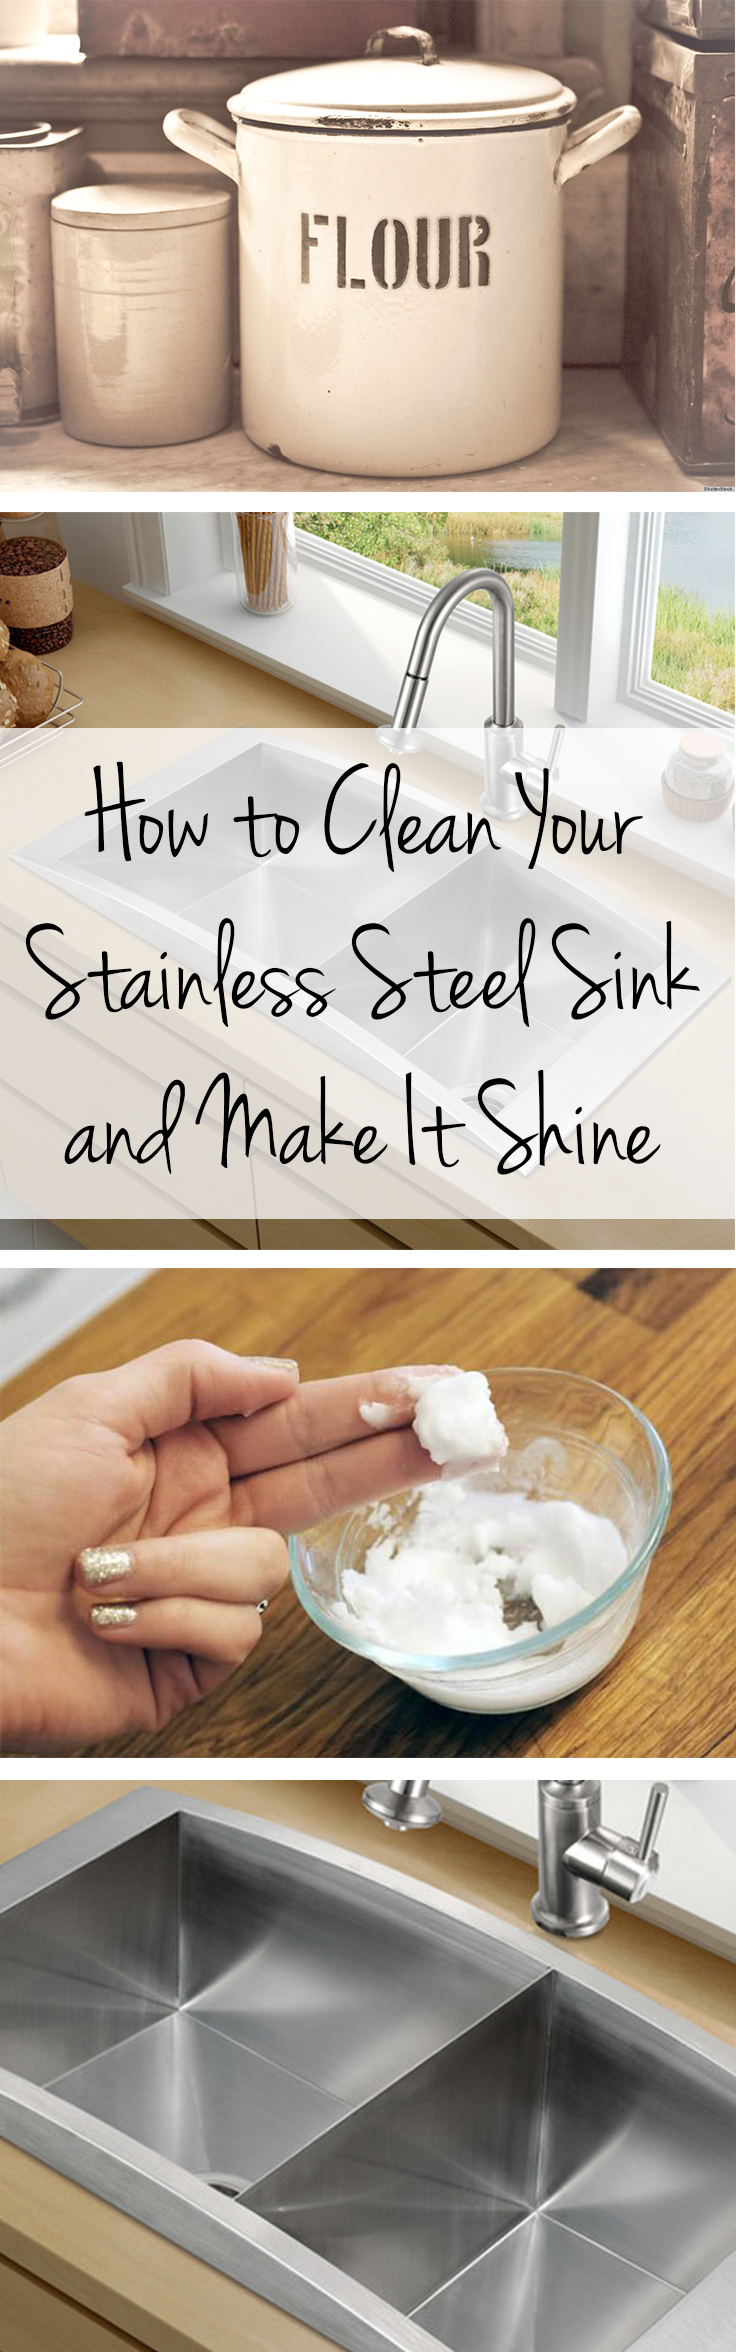 How To Clean Your Stainless Steel Sink And Make It Shine